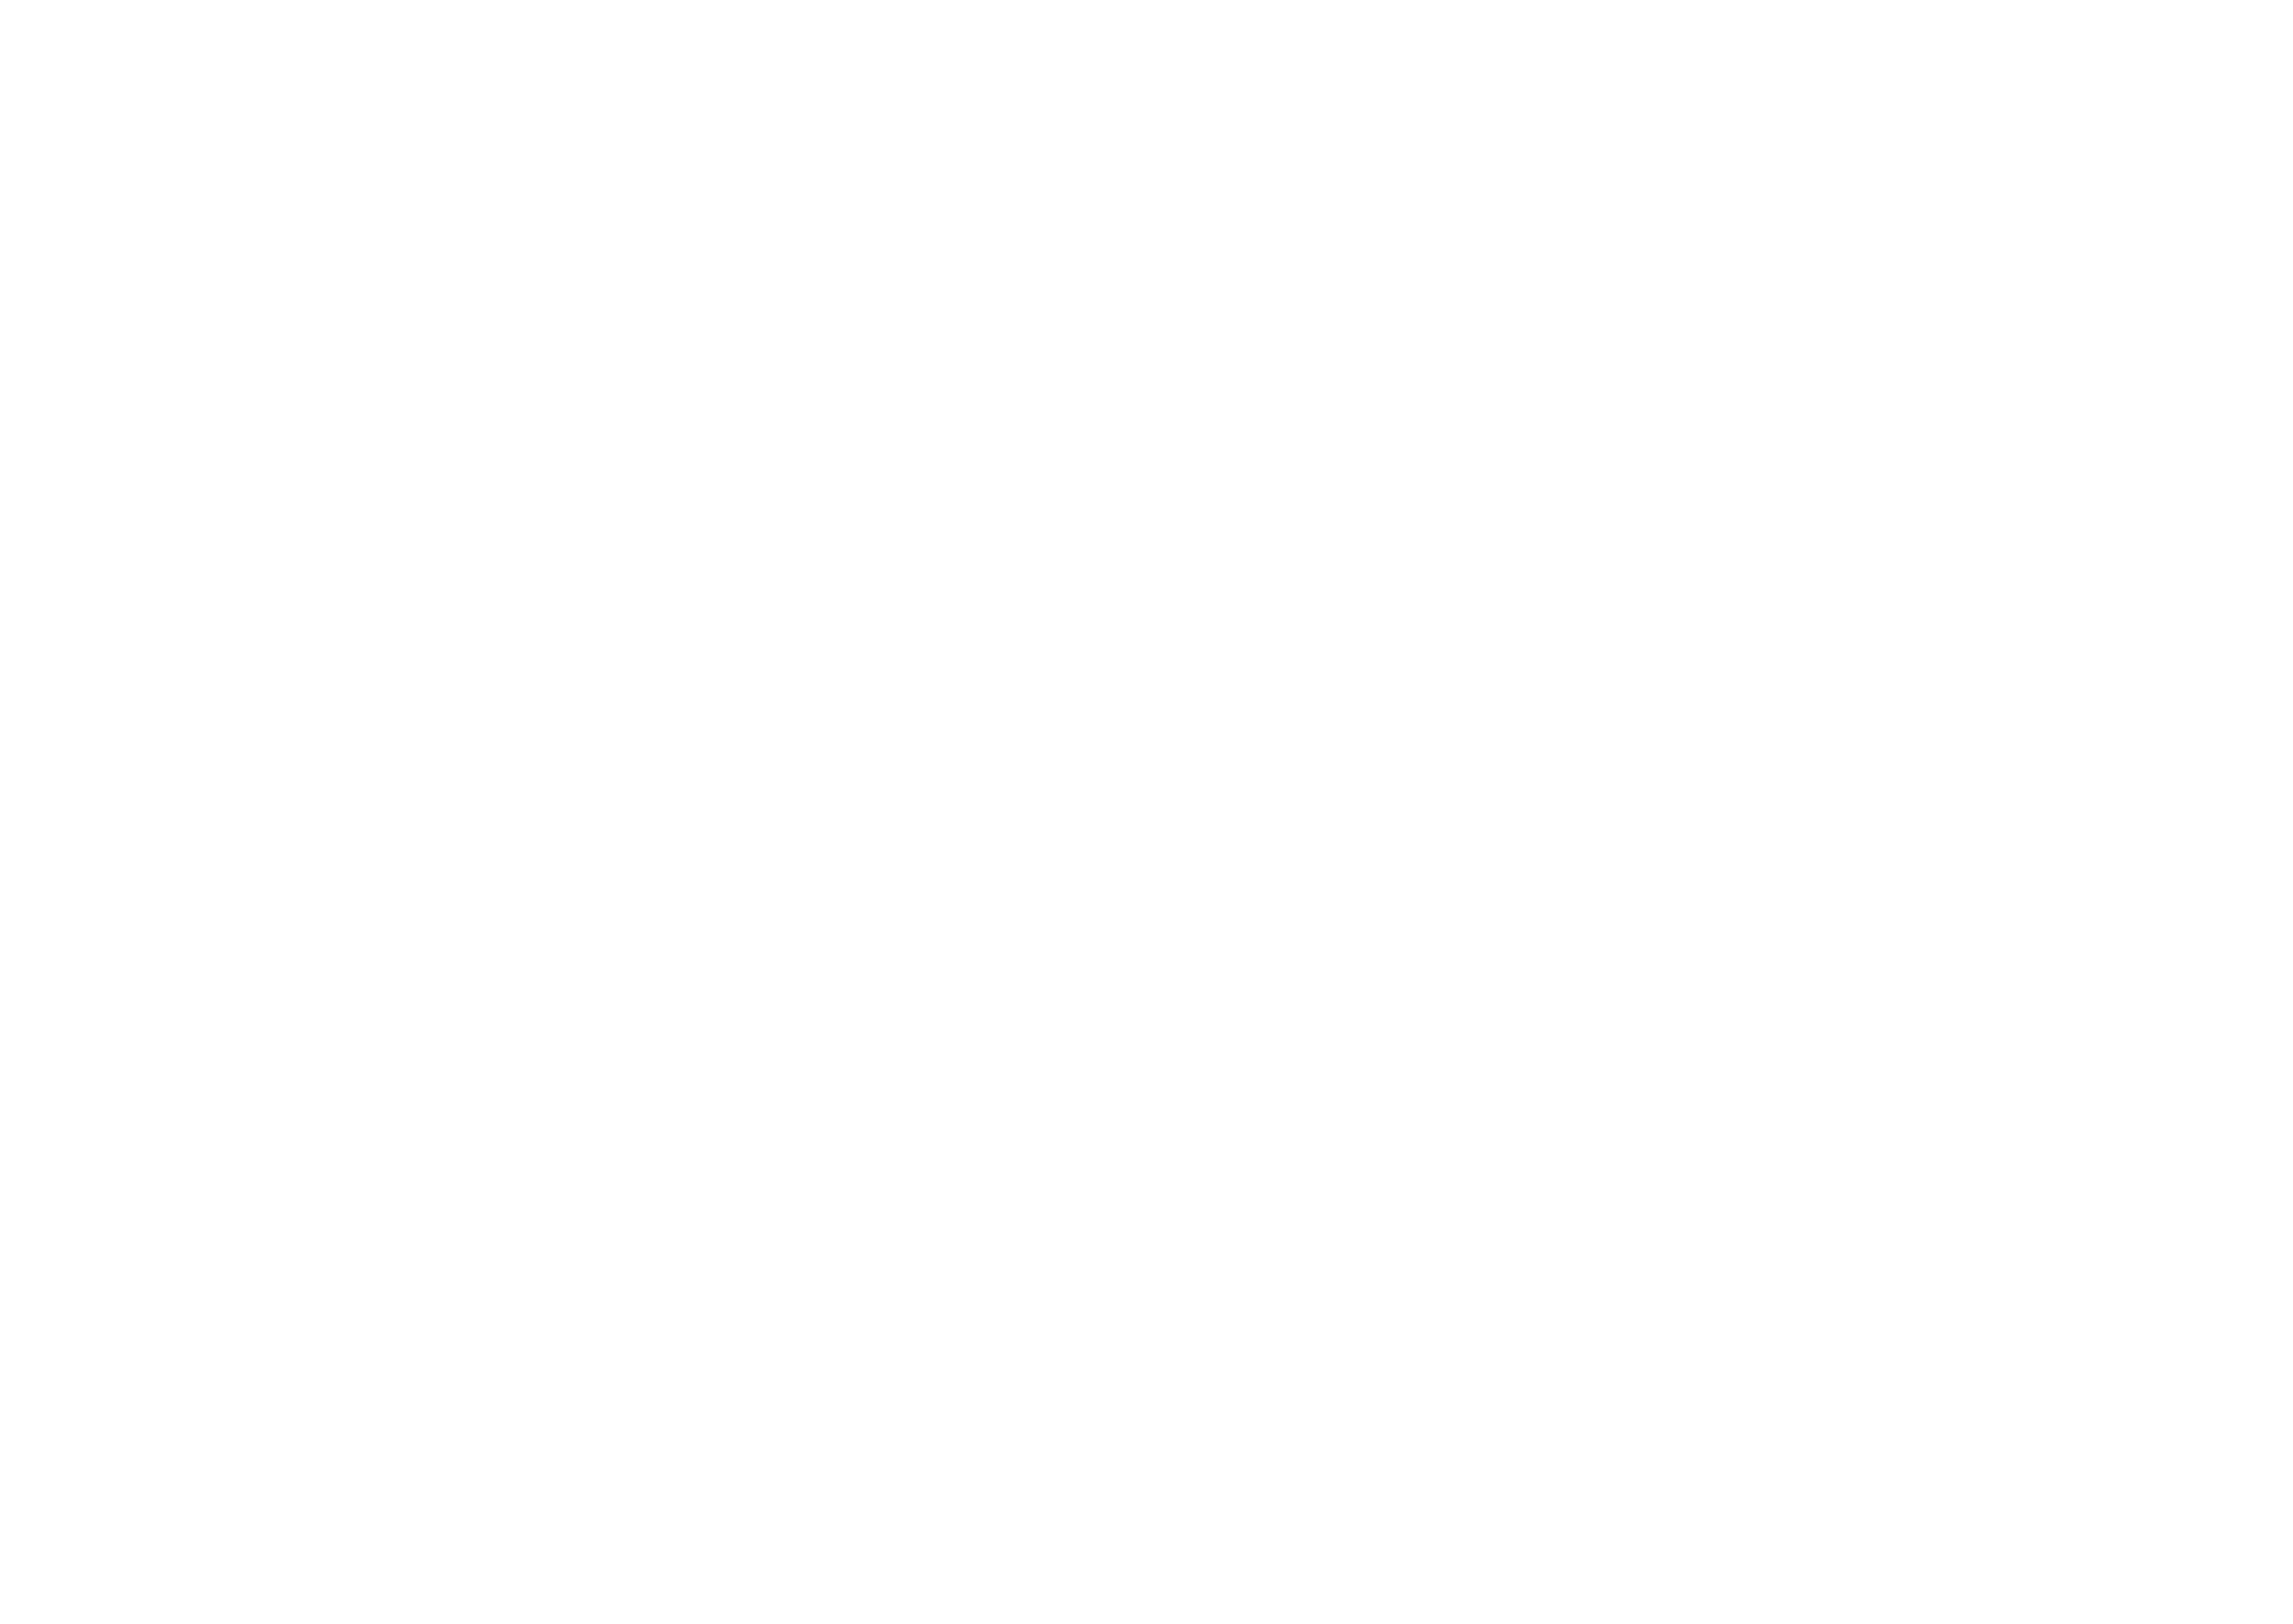 Map with shaded in states showing operation locations